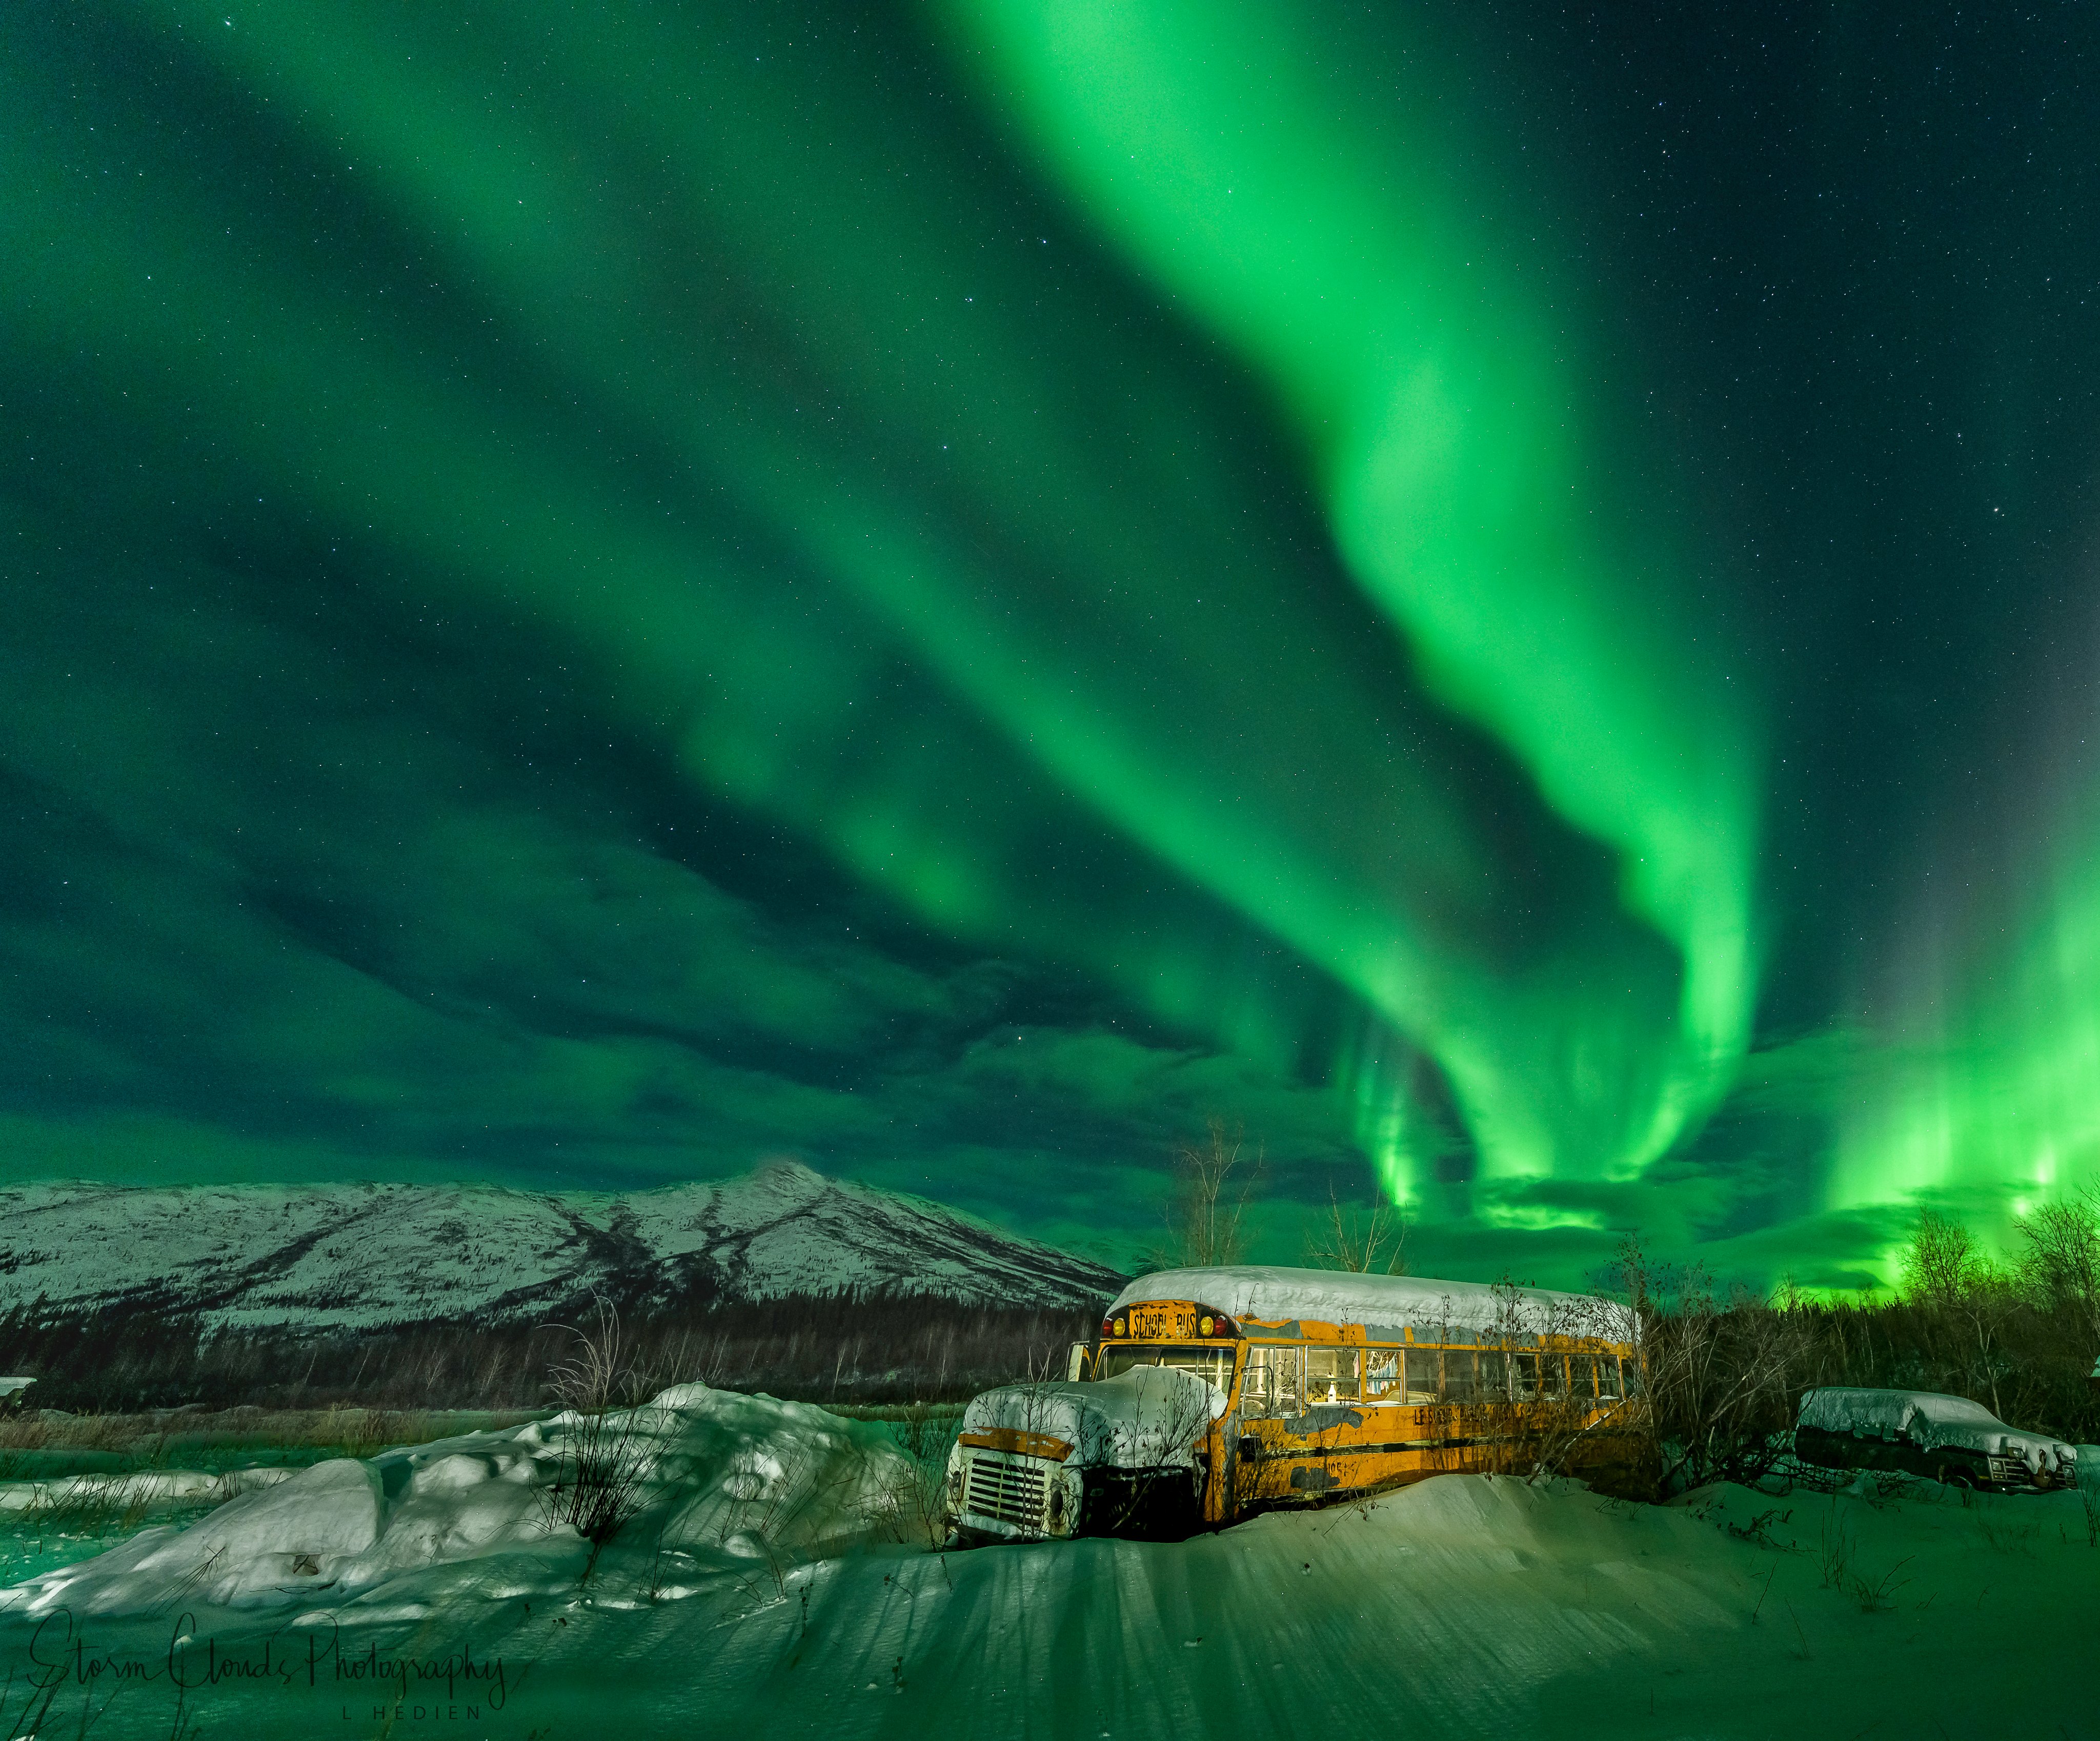 1st Place Aurora over Coldfoot in Alaska by Laura Hedien @lhedien